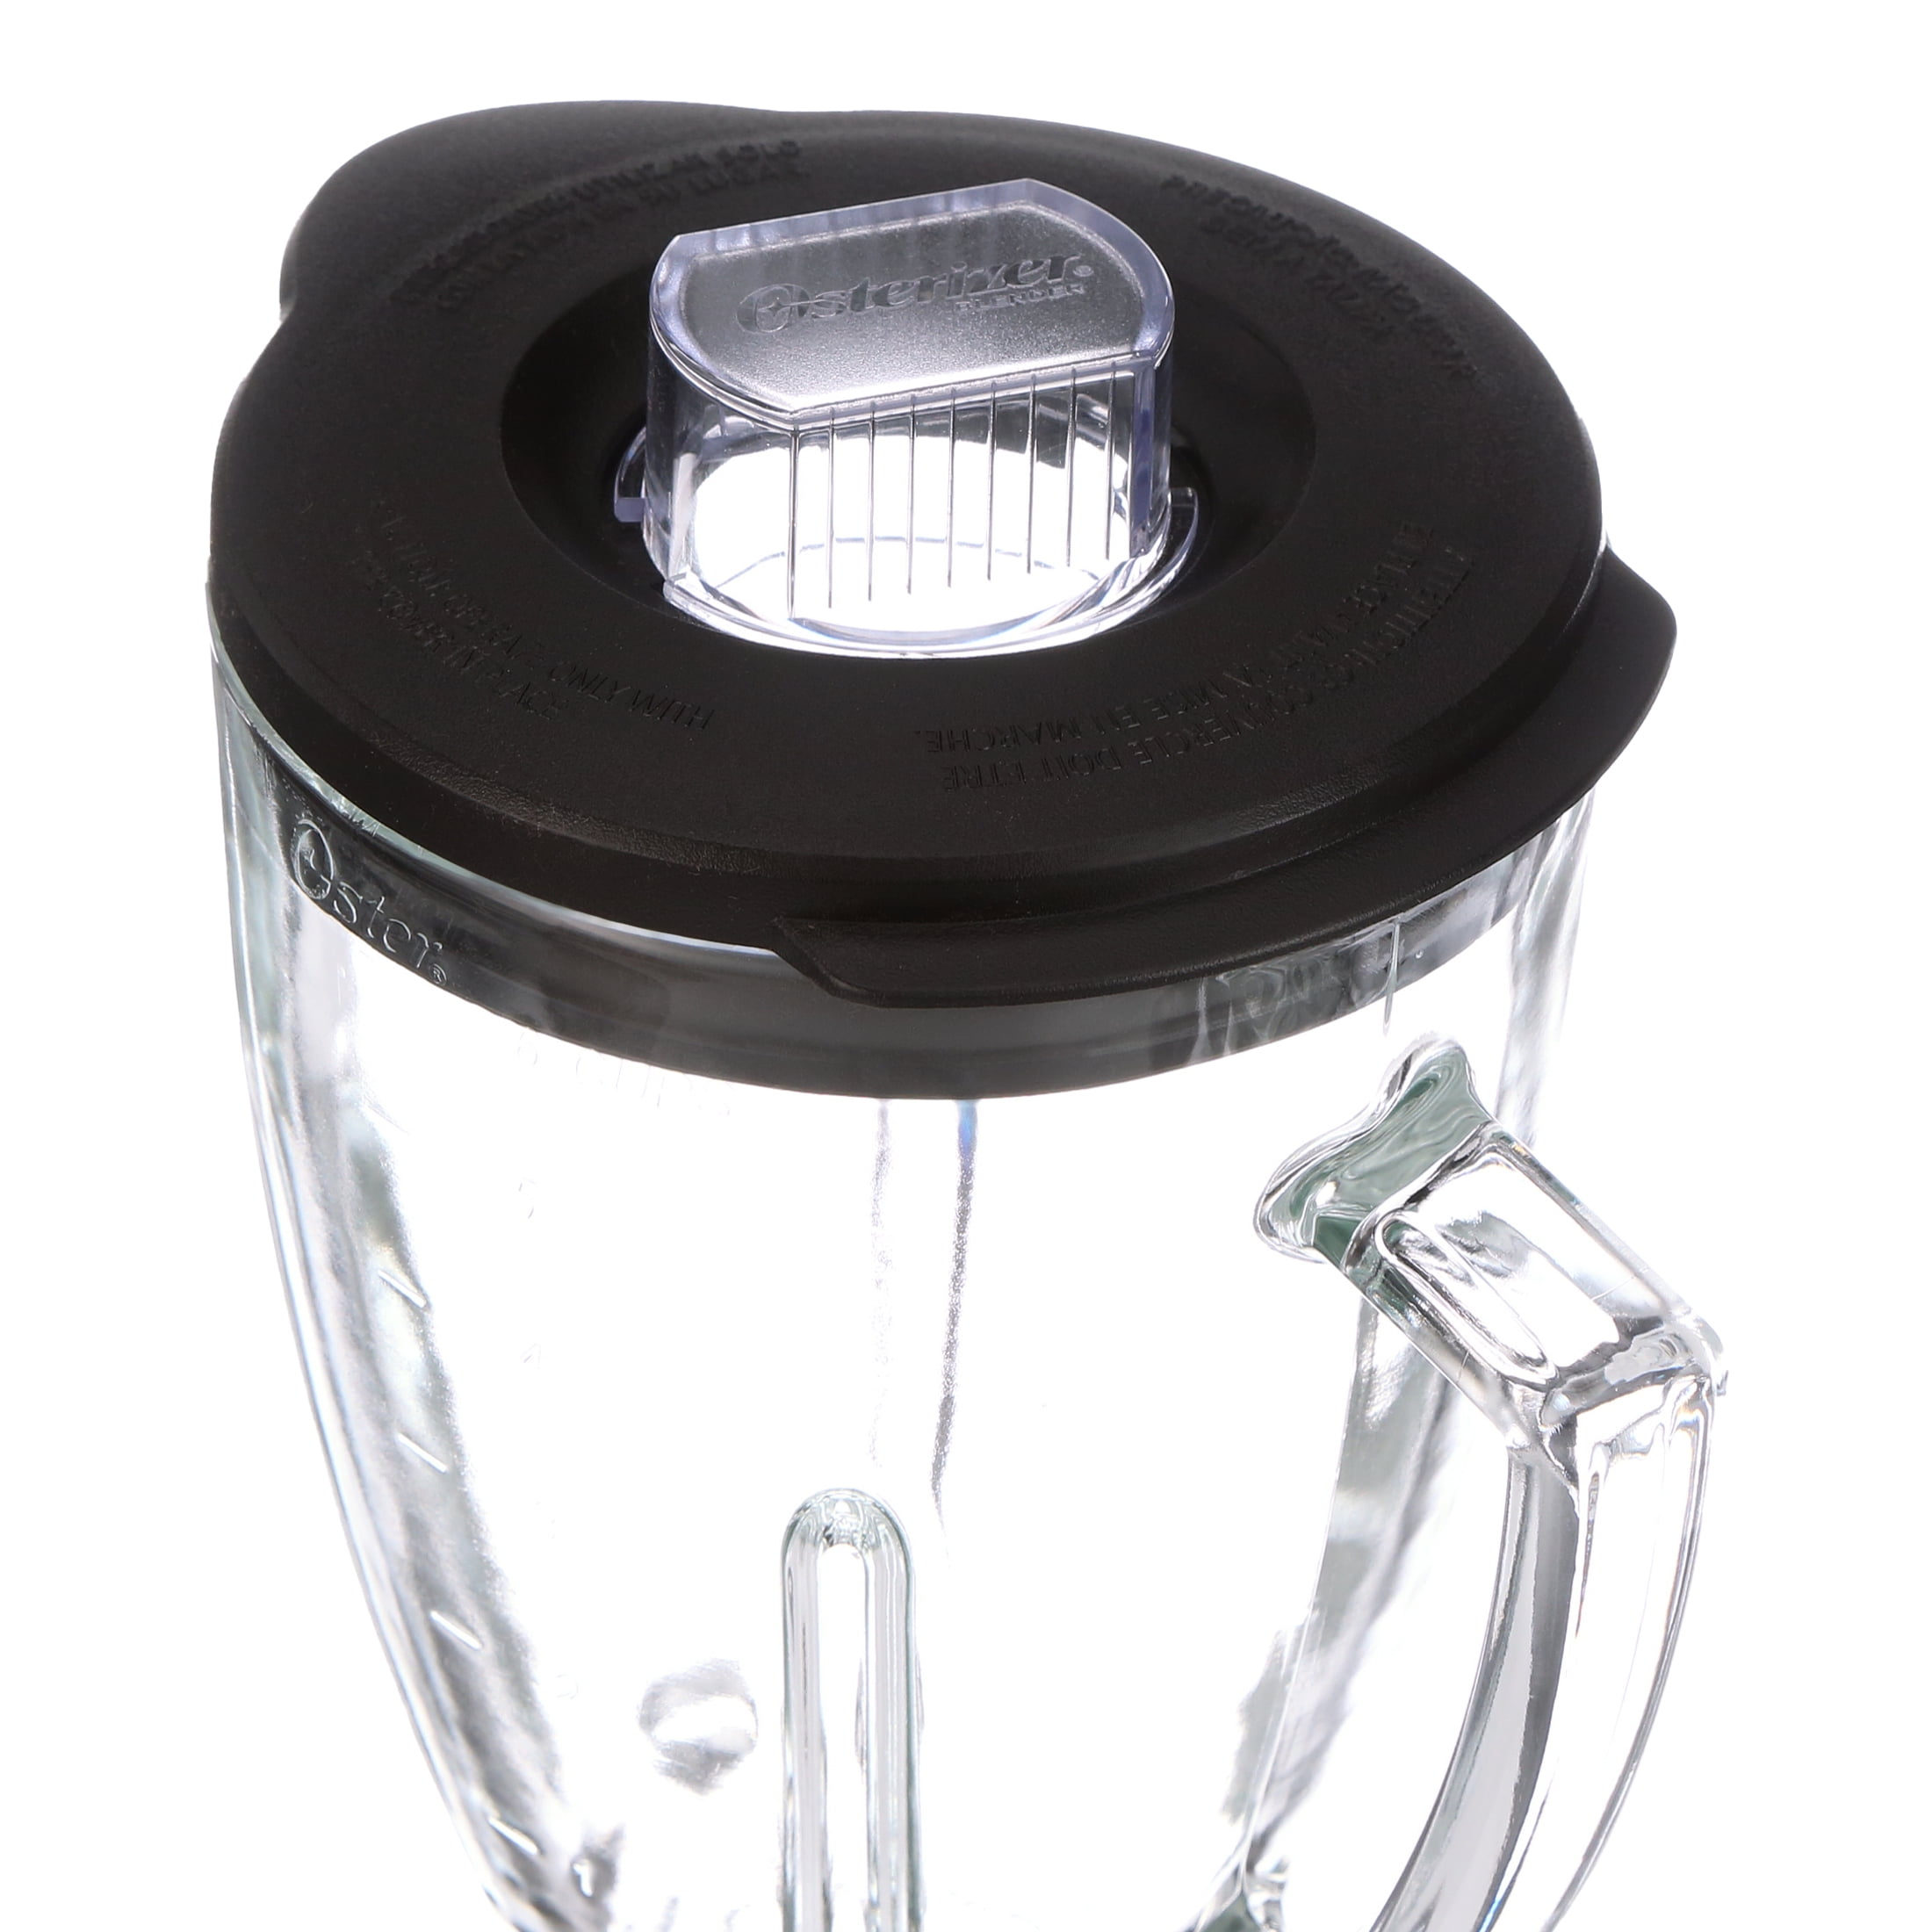 Brentwood P-OST723 6 Piece Extra Large Capacity Glass Jar Replacement Set Fits Oster Blender